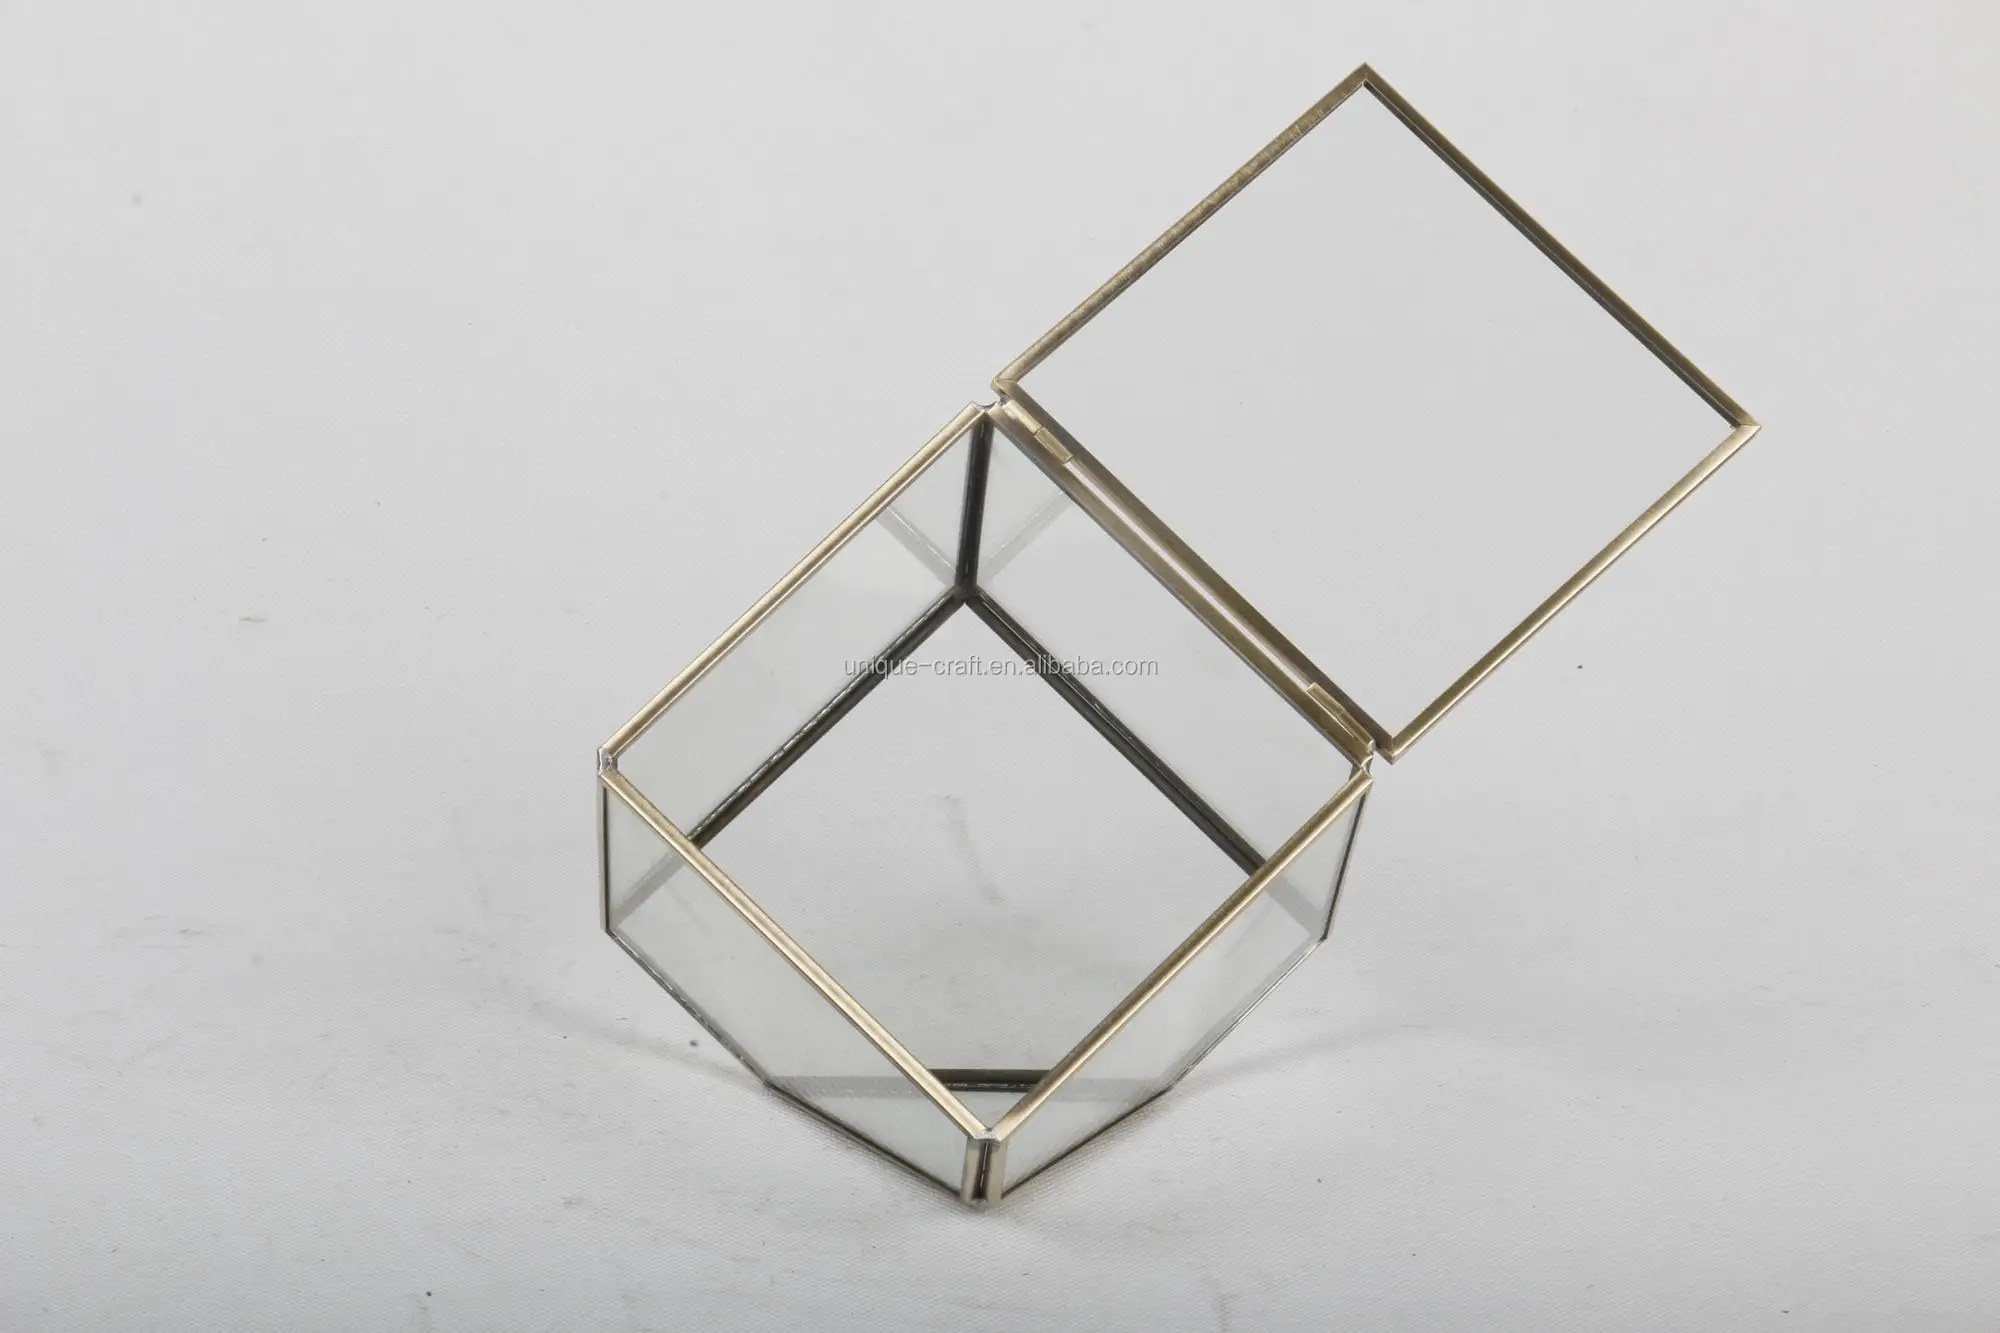 4 Inch Antique Brass Copper Small Glass Geometric Cube Terrarium Supplies with Hinged Door